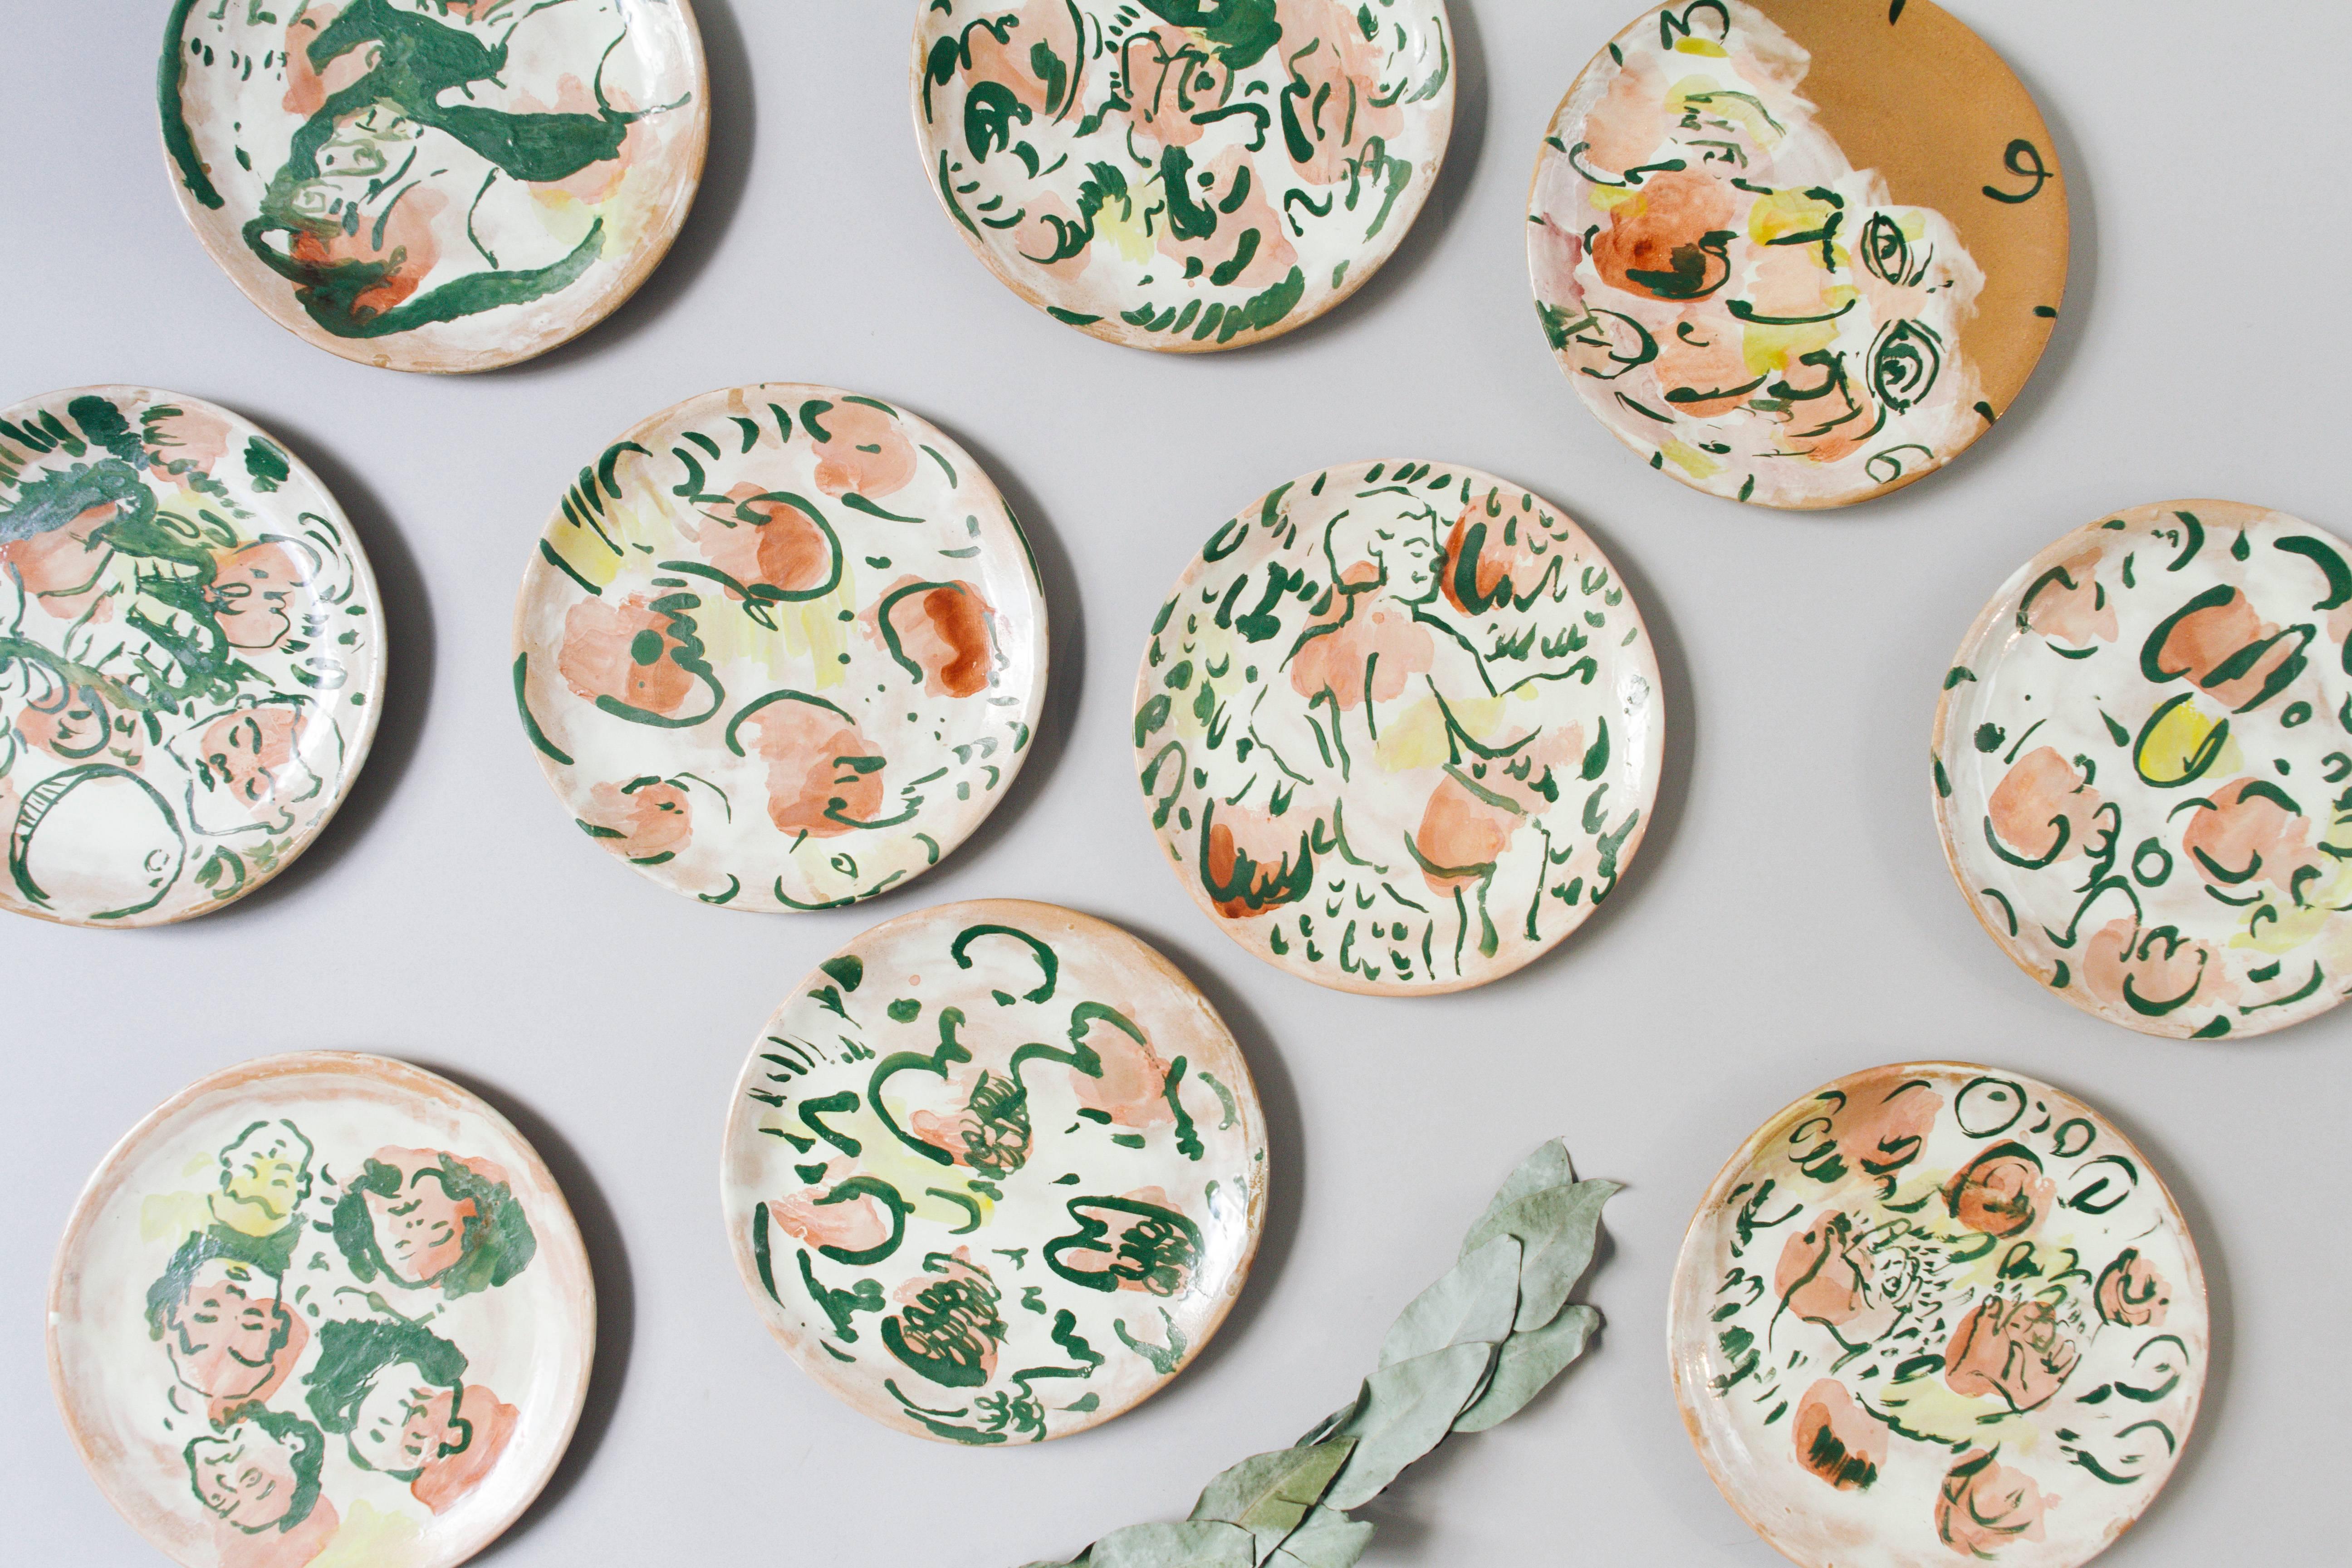 This majolica pottery plate collection was designed by Mexican sculptor, painter, and ceramist Lorenzo Lorenzzo — made in his studio, in the colonial town of San Miguel de Allende, in the state of Guanajuato, Mexico. For this limited edition